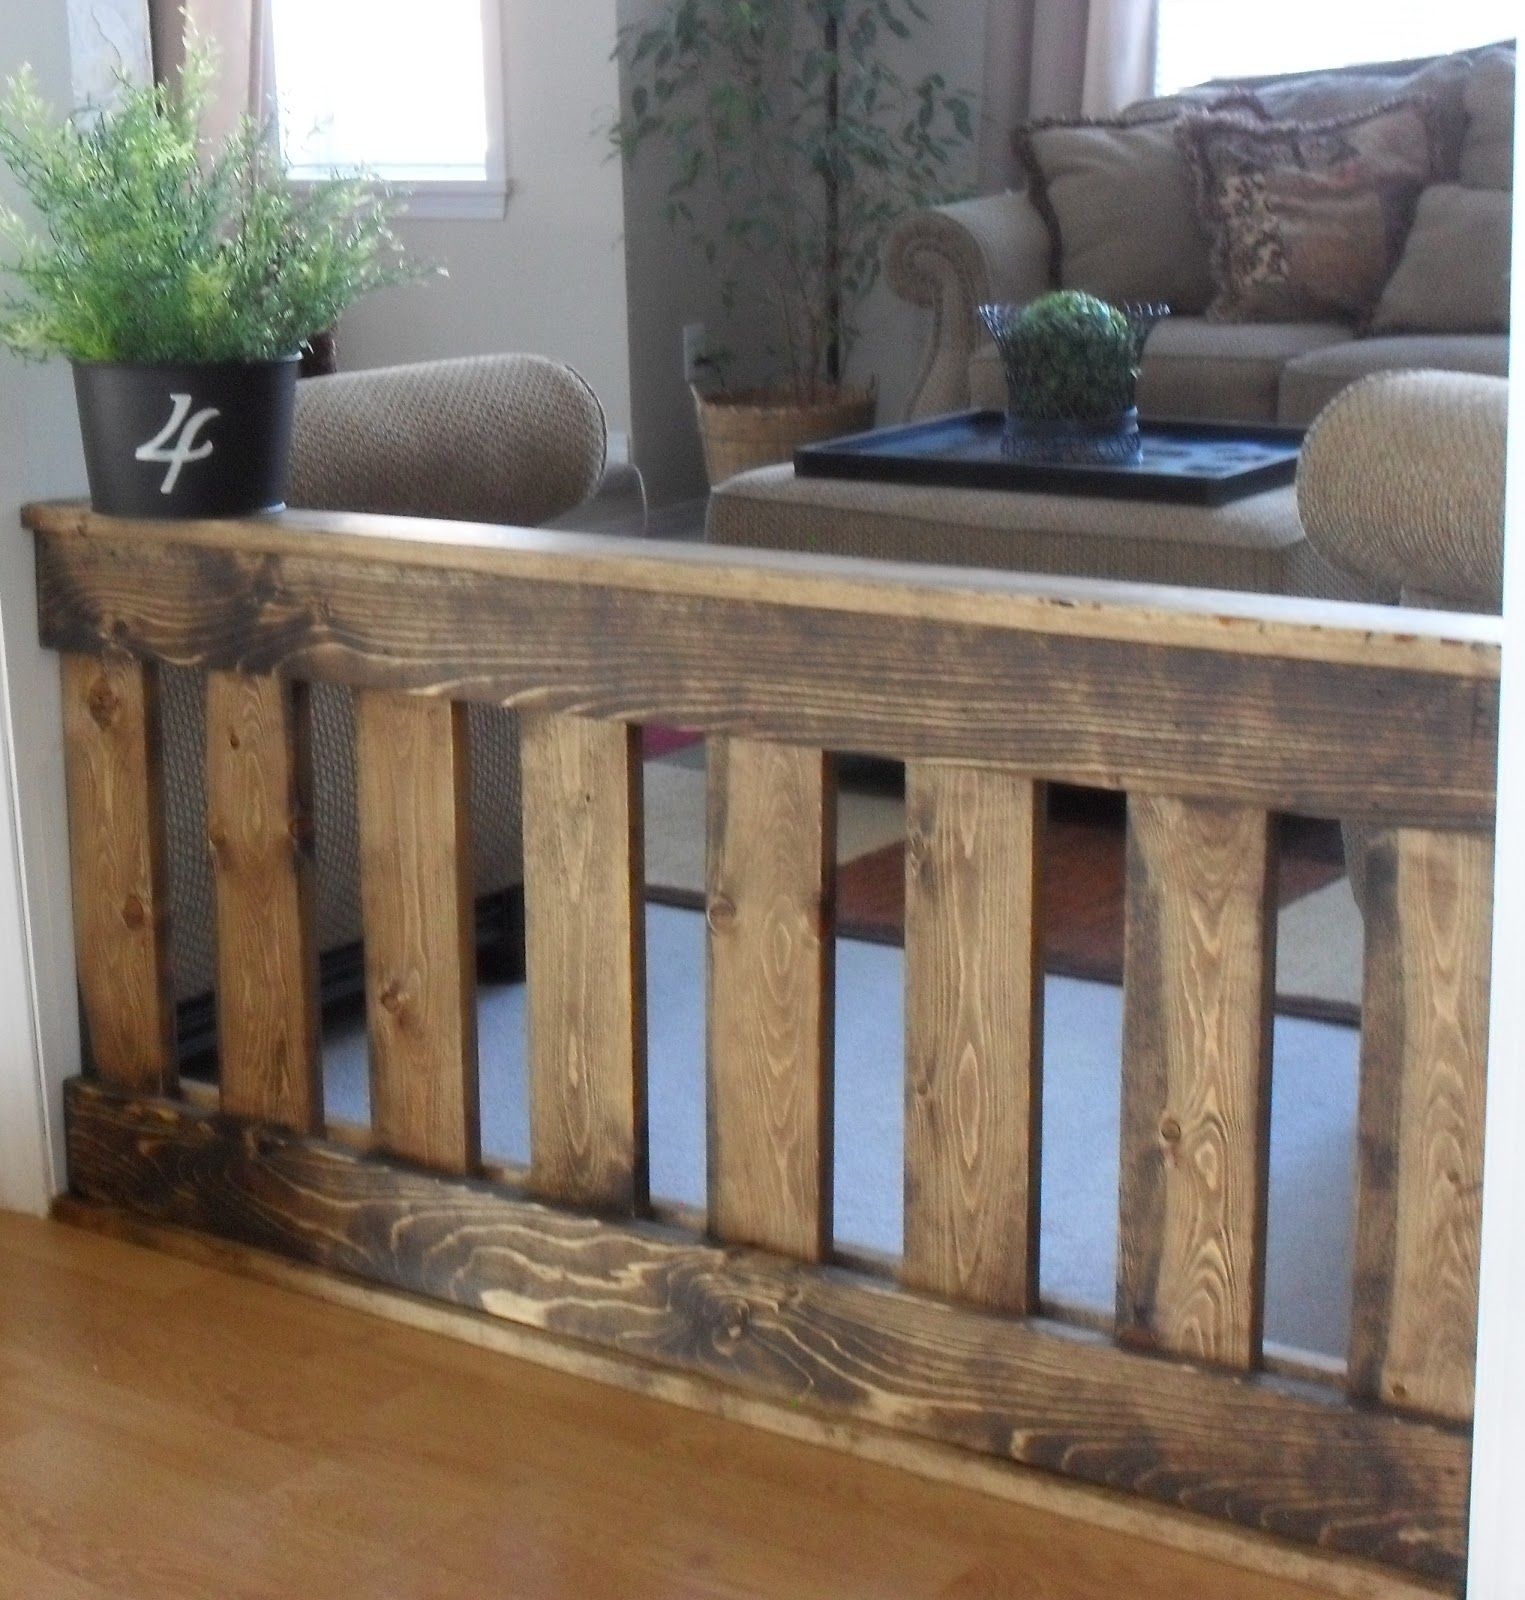 Indoor fence for dogs